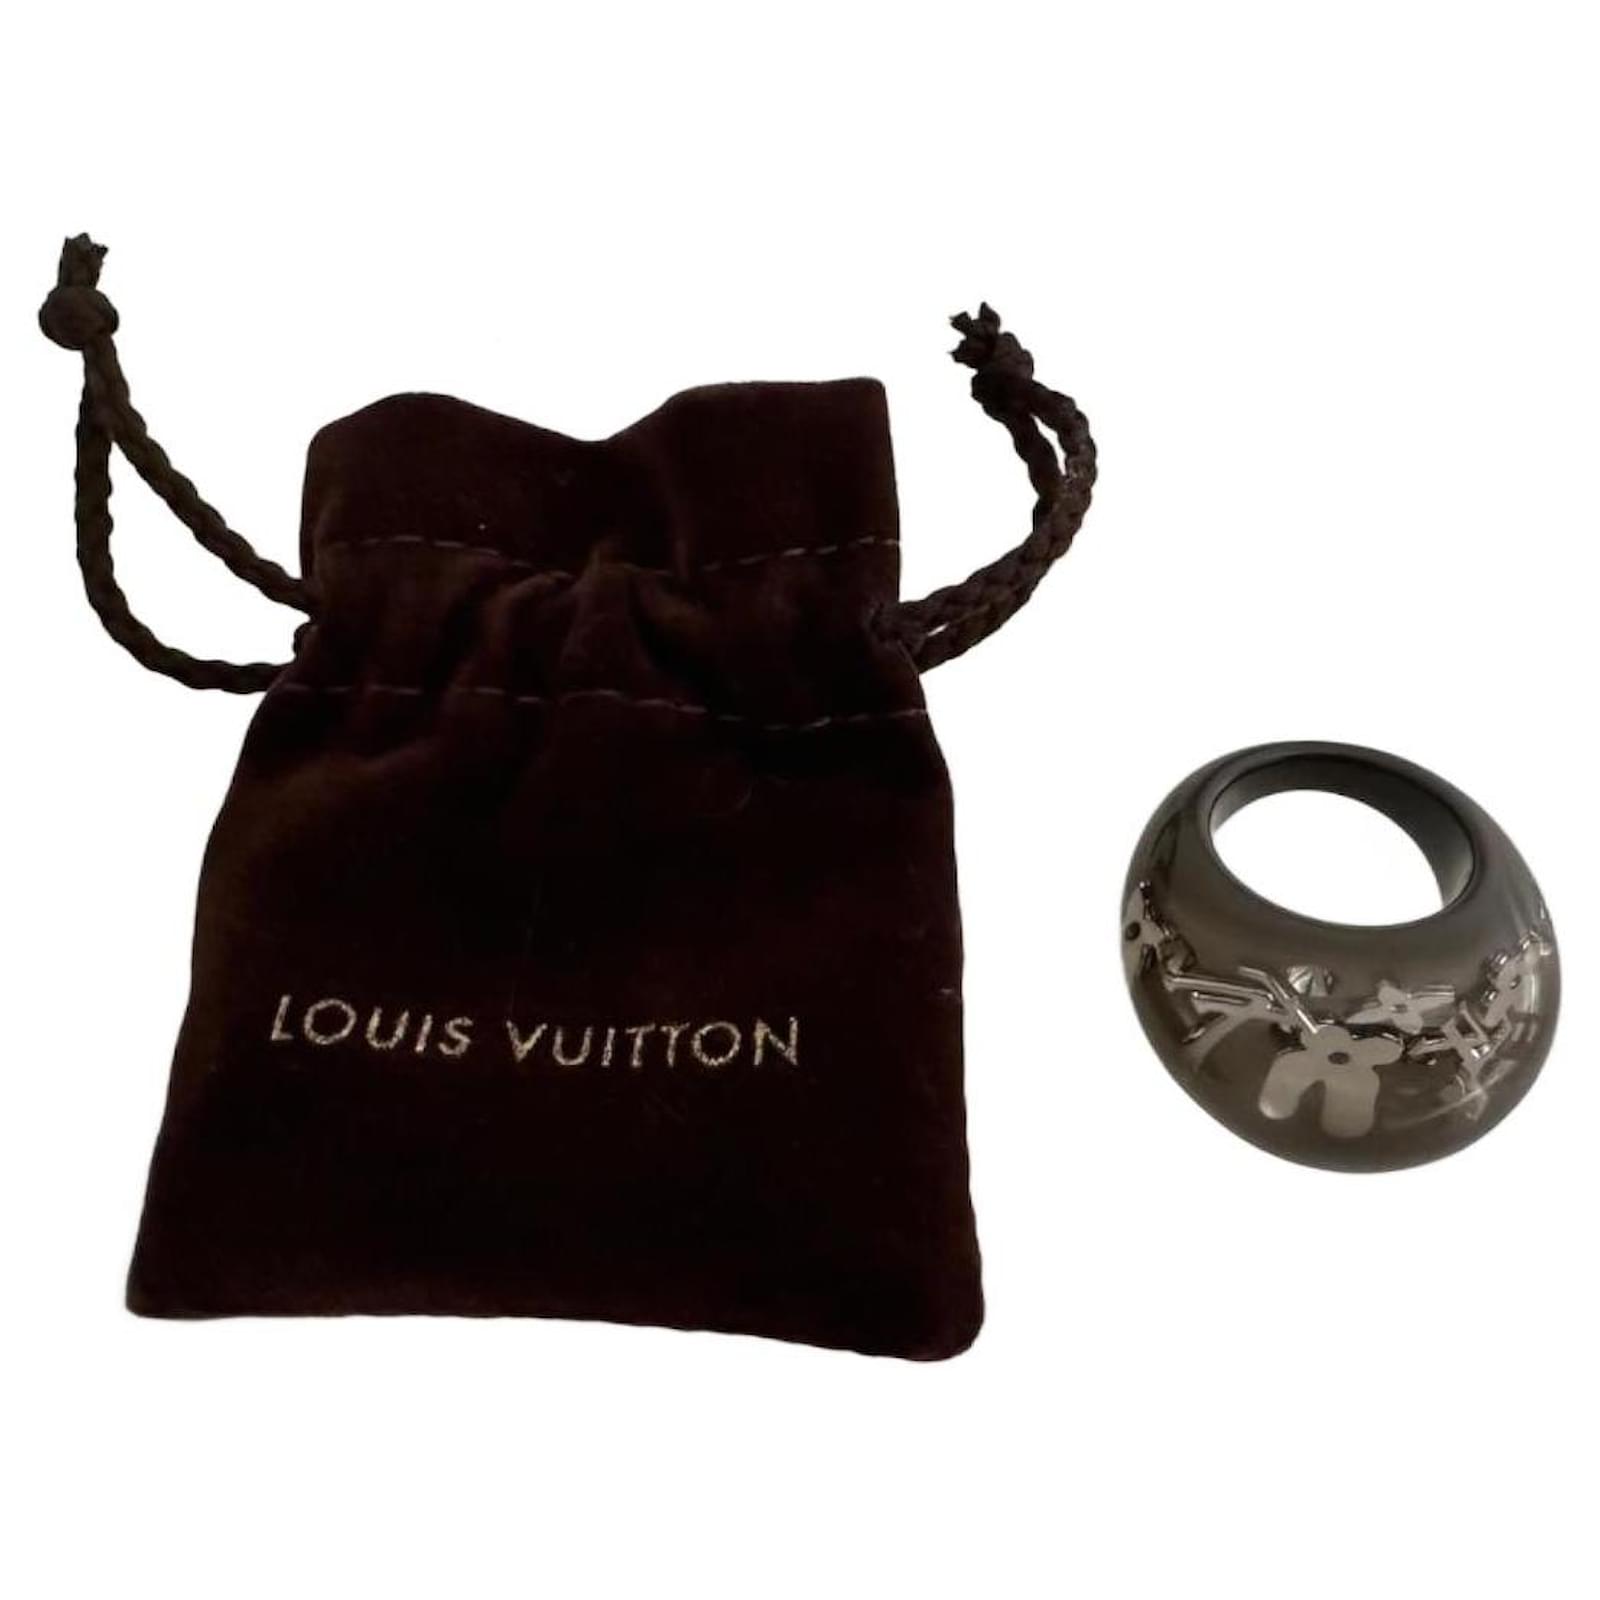 NEW LOUIS VUITTON RING INCLUSION MONOGRAM 50 NEW RING BROWN RESIN